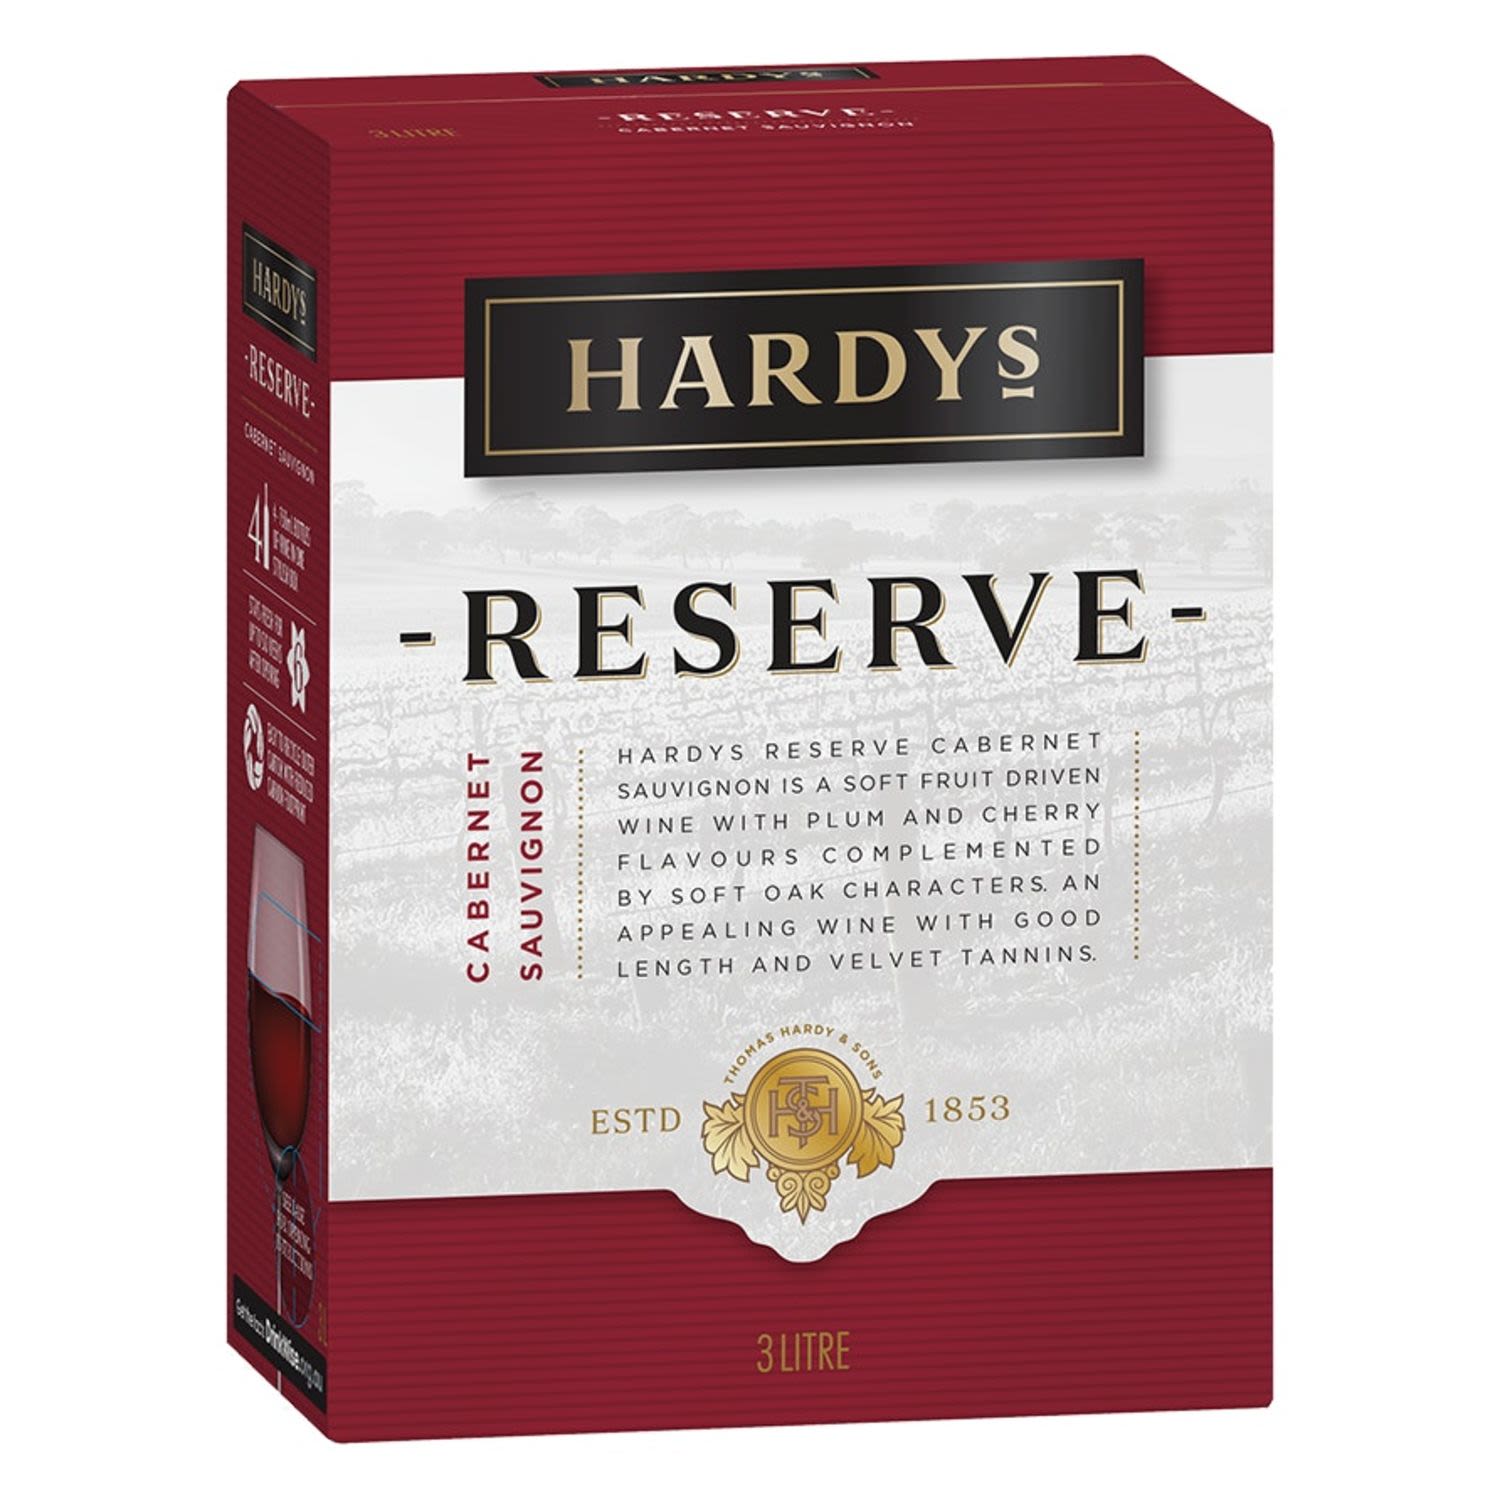 From Hardy's reserve, this Cab Sauv delivers a soft, fruit-driven wine with plum and cherry subtle oak and firm tannins. A very appealing wine.<br /> <br />Alcohol Volume: 13.50%<br /><br />Pack Format: Cask<br /><br />Standard Drinks: 32</br /><br />Pack Type: Cask<br /><br />Country of Origin: Australia<br /><br />Region: South Australia<br /><br />Vintage: Non Vintage<br />